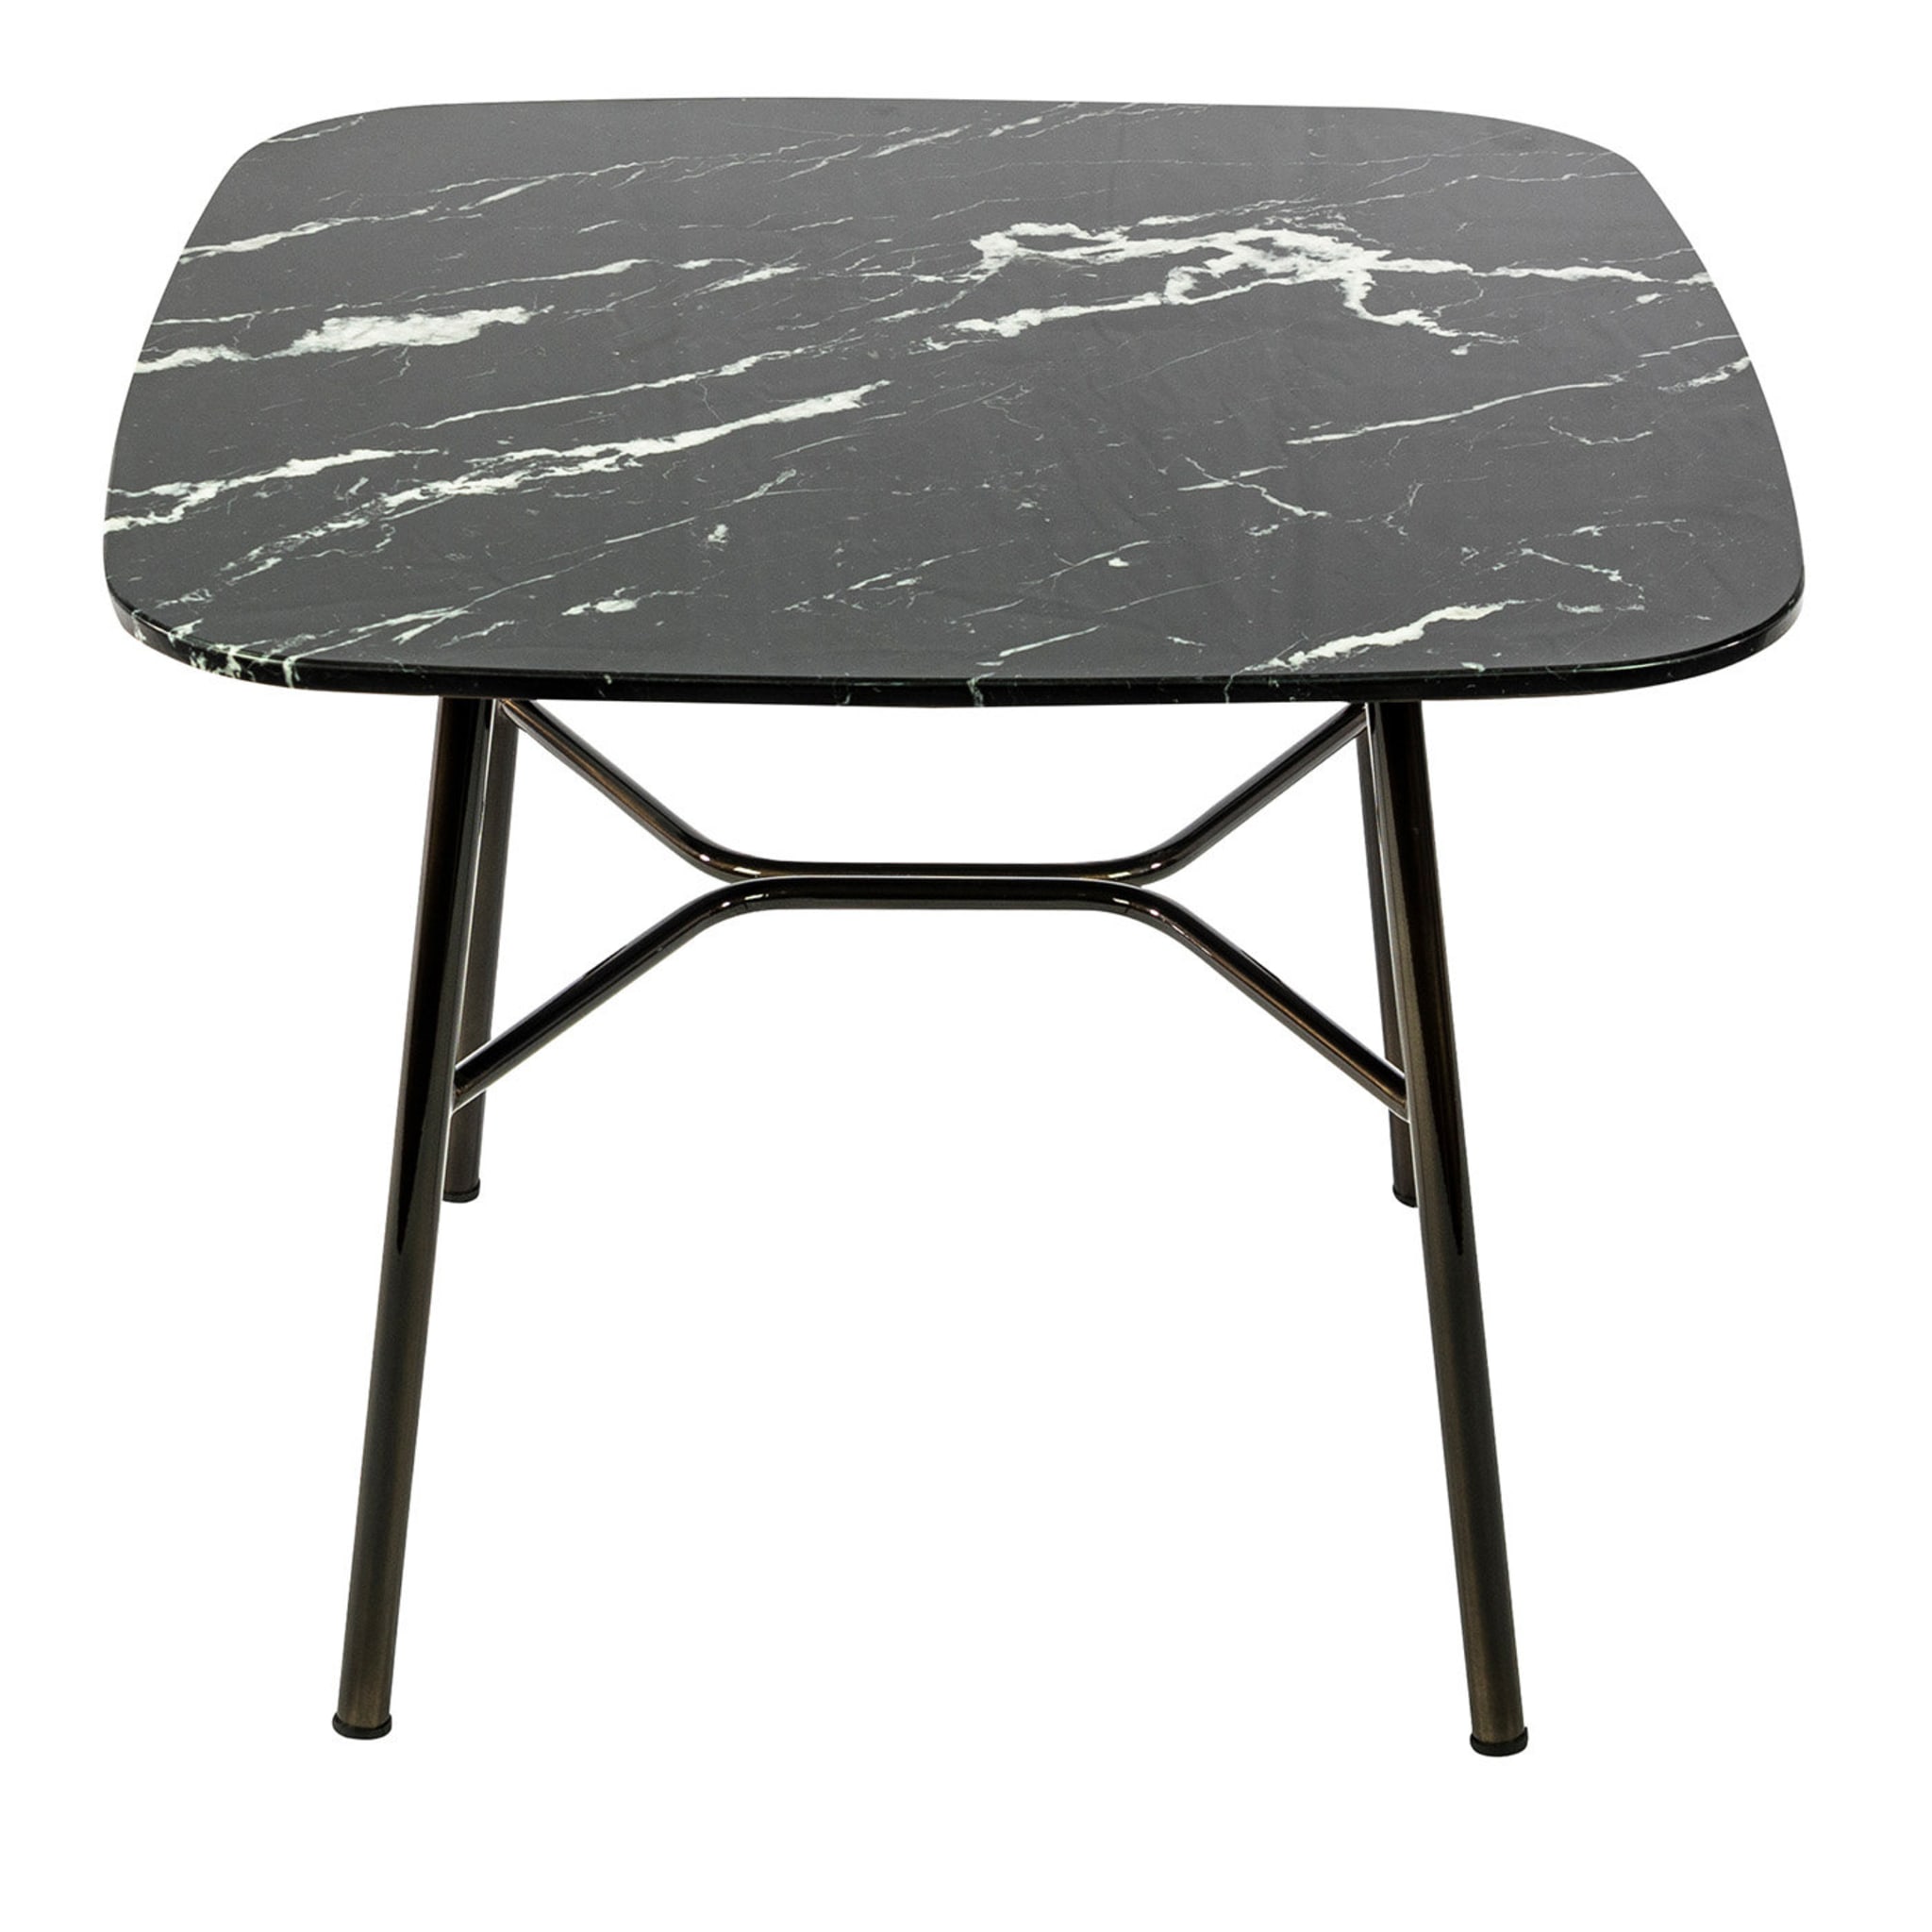 Yuki Square Side Table with Black Marquinia Top # 1 by Ep Studio - Main view